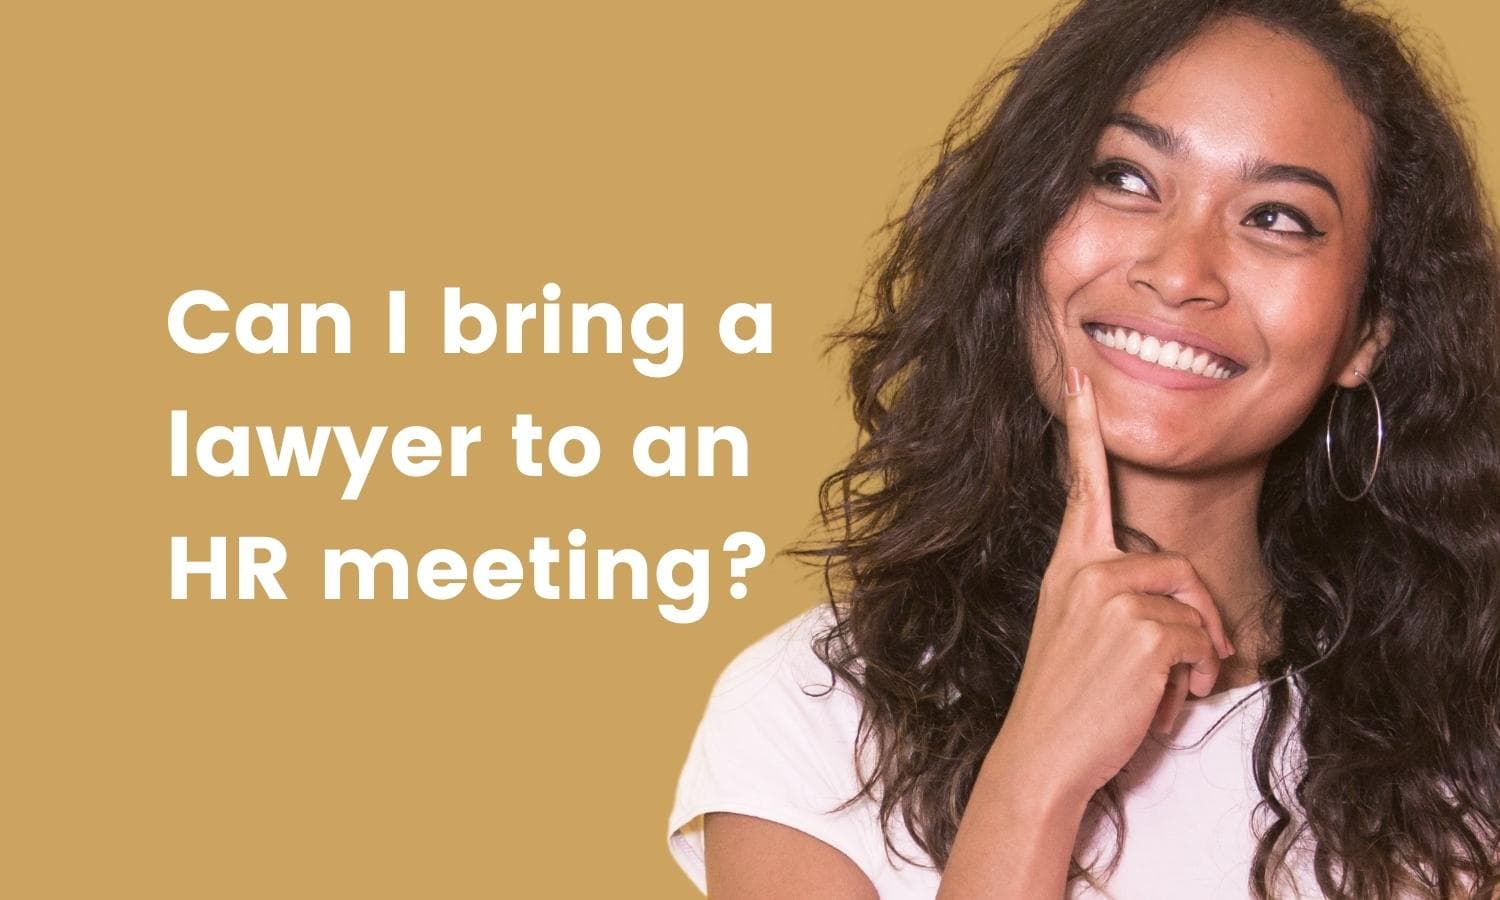 Can_I_bring_a_lawyer_to_an__HR_meeting